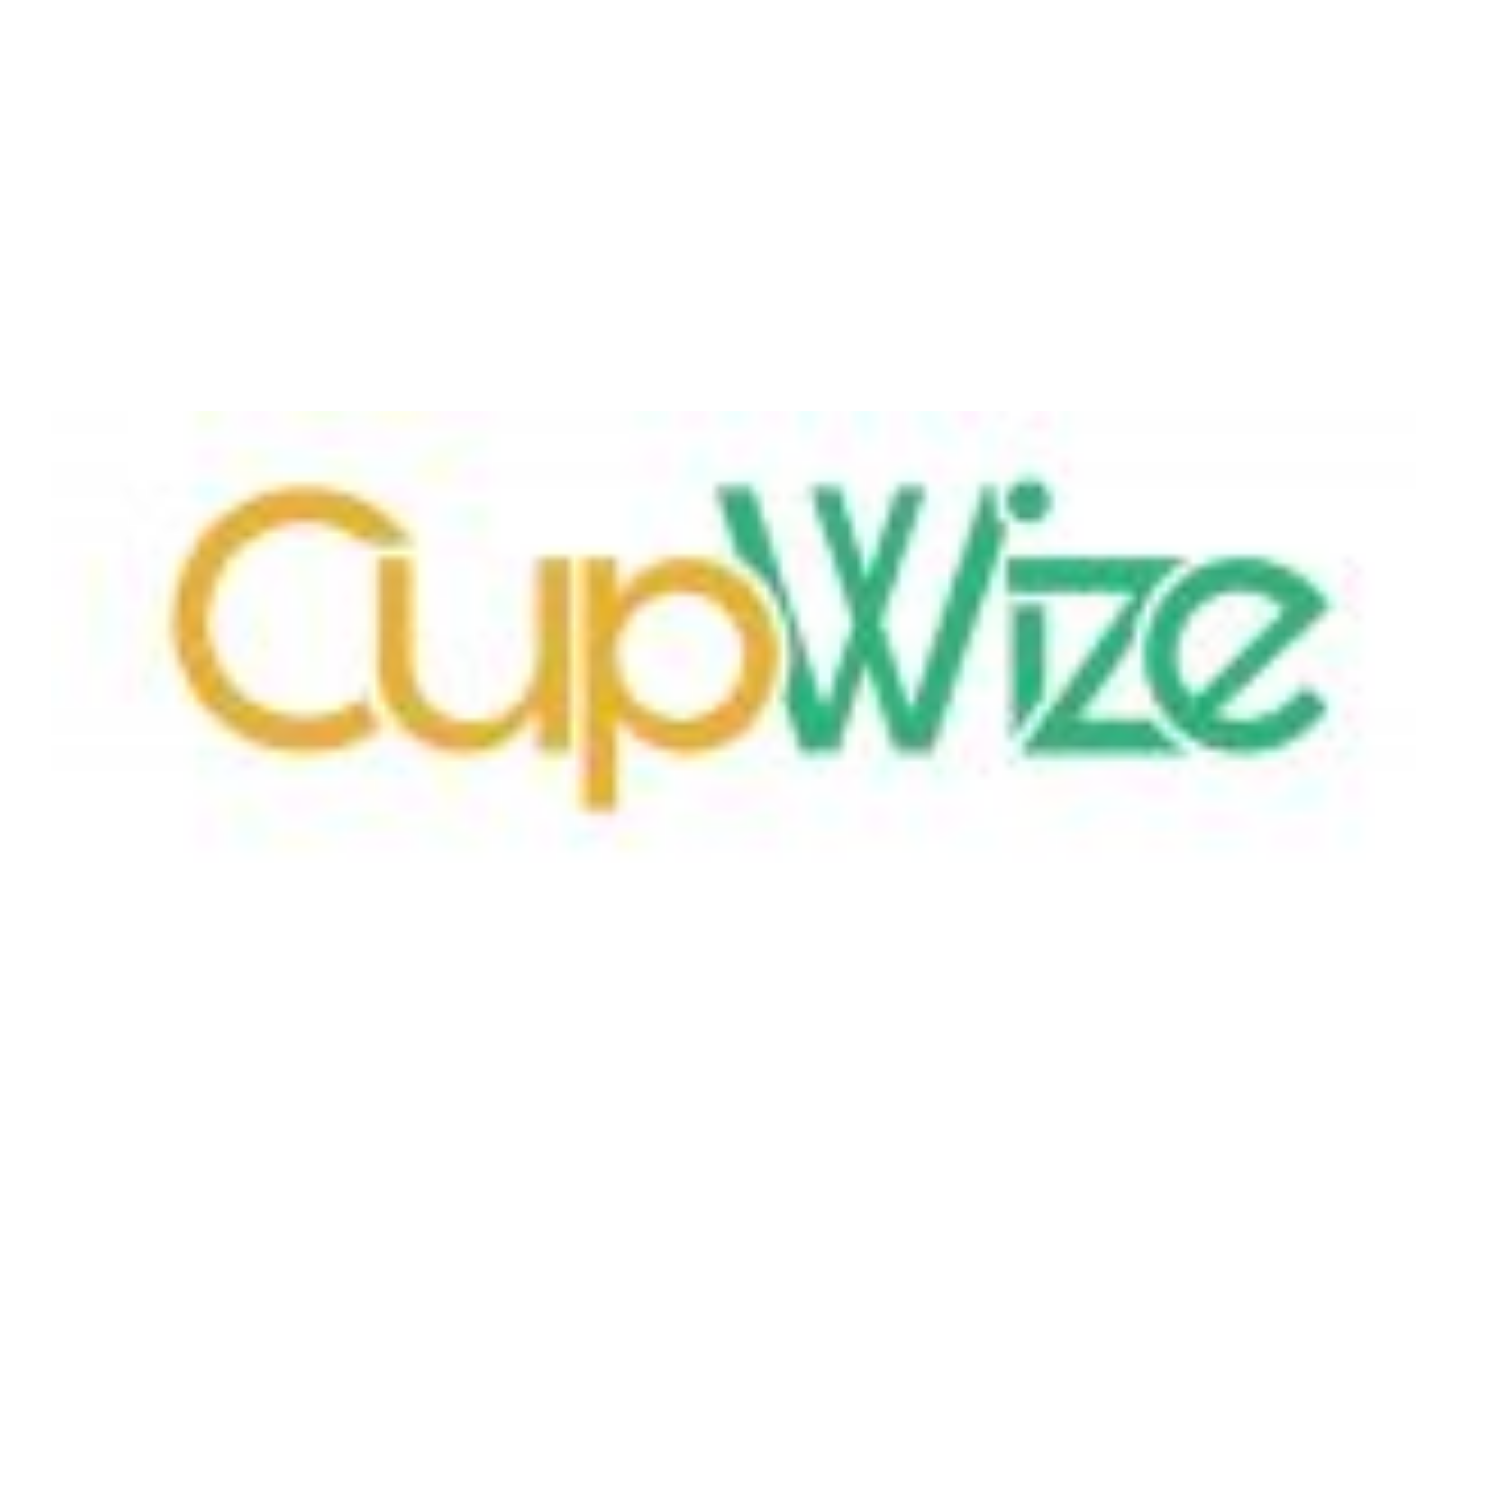 cup wize